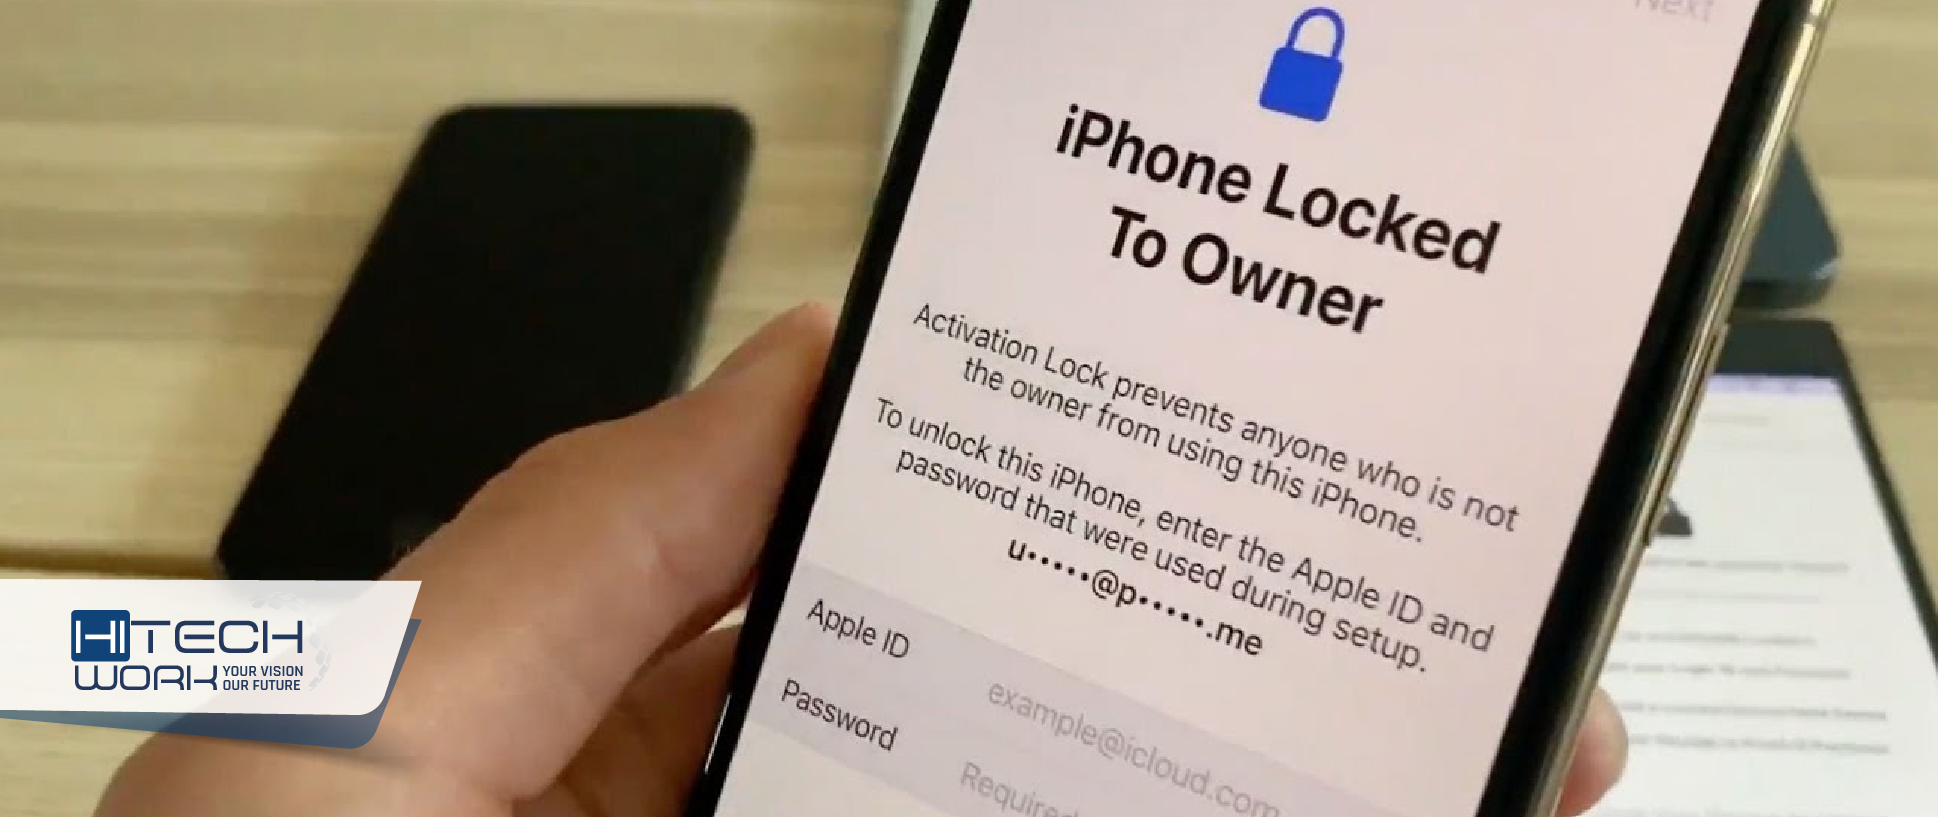 How To Unlock iPhone Locked to Owner for FREE